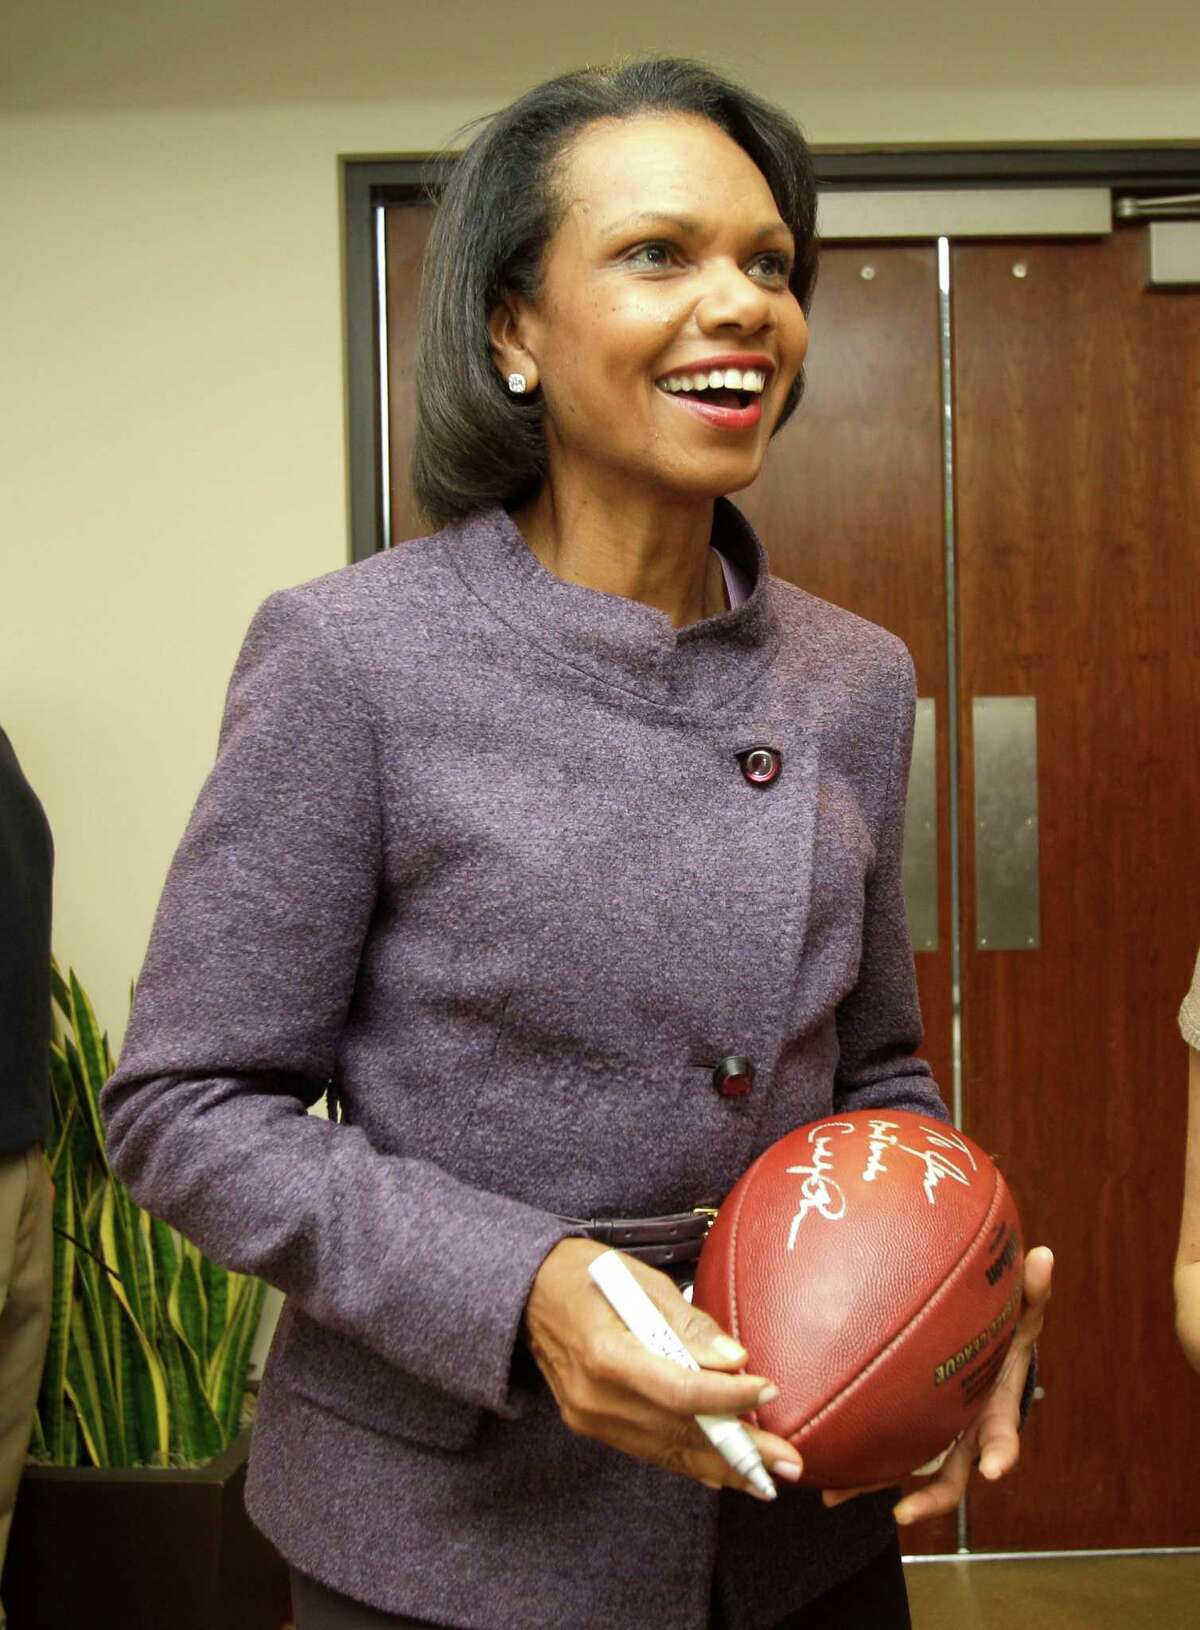 In this Oct. 10, 2010, file photo, former Secretary of State Condoleezza Rice laughs after autographing a football following her visit with the Cleveland Browns coaches and players at the team's NFL football training facility in Berea, Ohio. A person with direct knowledge of the process tells The Associated Press on Friday, Oct. 4, 2013, that Rice is expected to be part of the selection committee that will pick the teams for the College Football Playoff next year. The person spoke on condition of anonymity because the selection process is still ongoing. (AP Photo/Amy Sancetta, File)